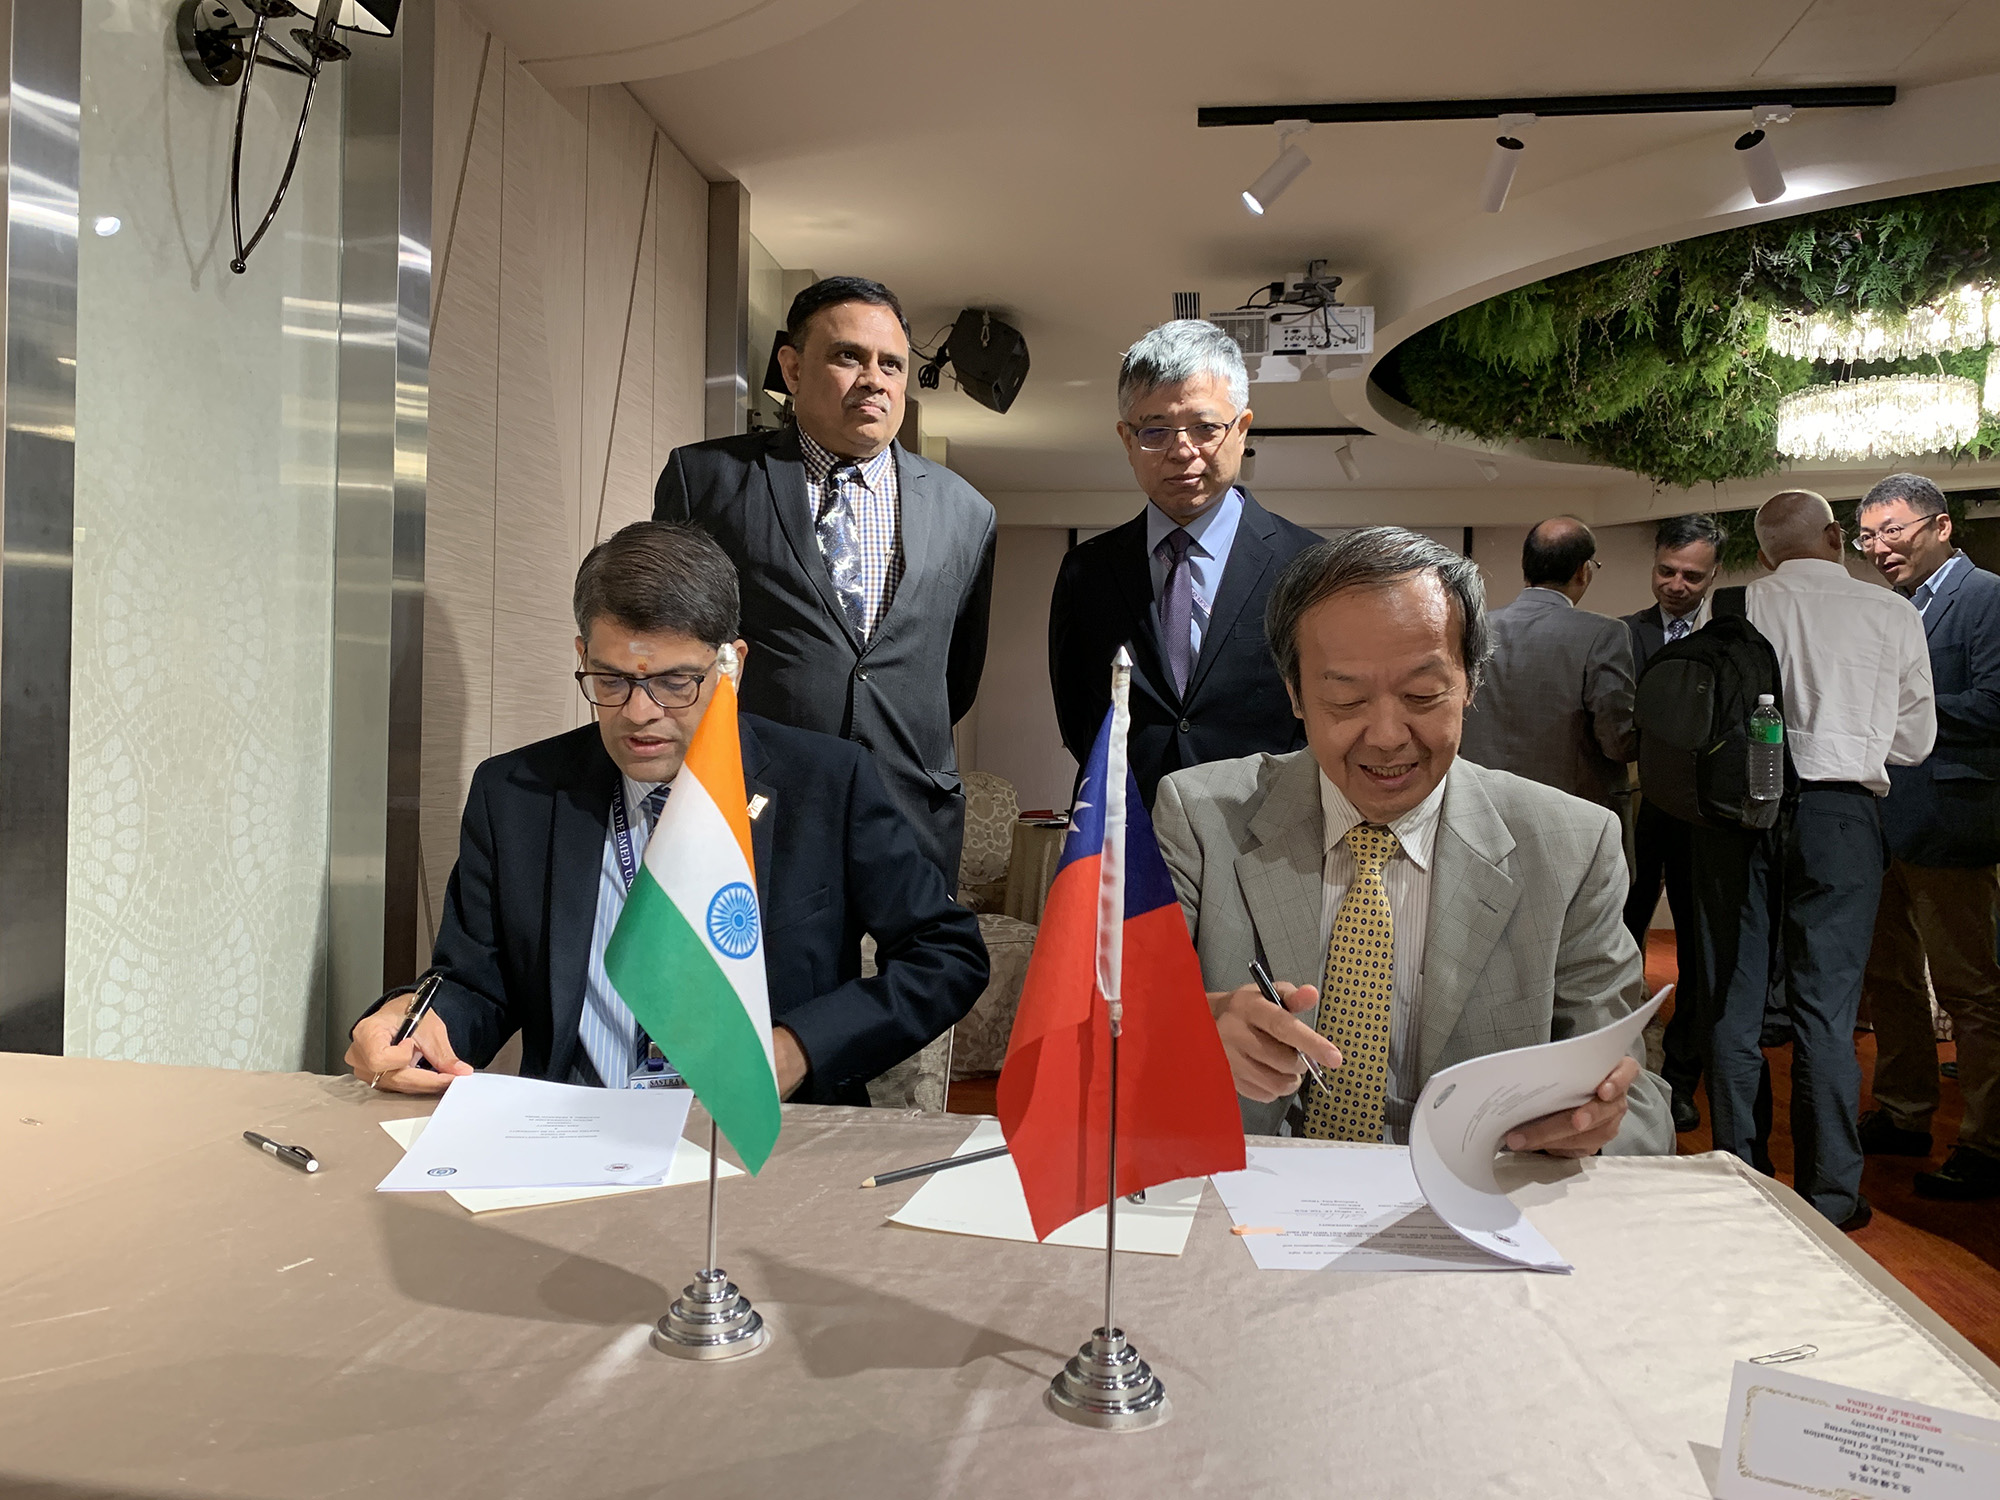 Asia University's Vice President and Dean of the College of Information and Electrical Engineering, Shian-Shyong Tseng (front row, right), signed the MOU with Dr. S. Vaidhyasubramaniam, President of SASTRA Deemed University in India (front row, left). This signing ceremony was witnessed by Deputy Minister of Education Mon-Chi Lio (back row, right) and Professor Tarak, Chairman of the All India Council for Technical Education (back row, left)